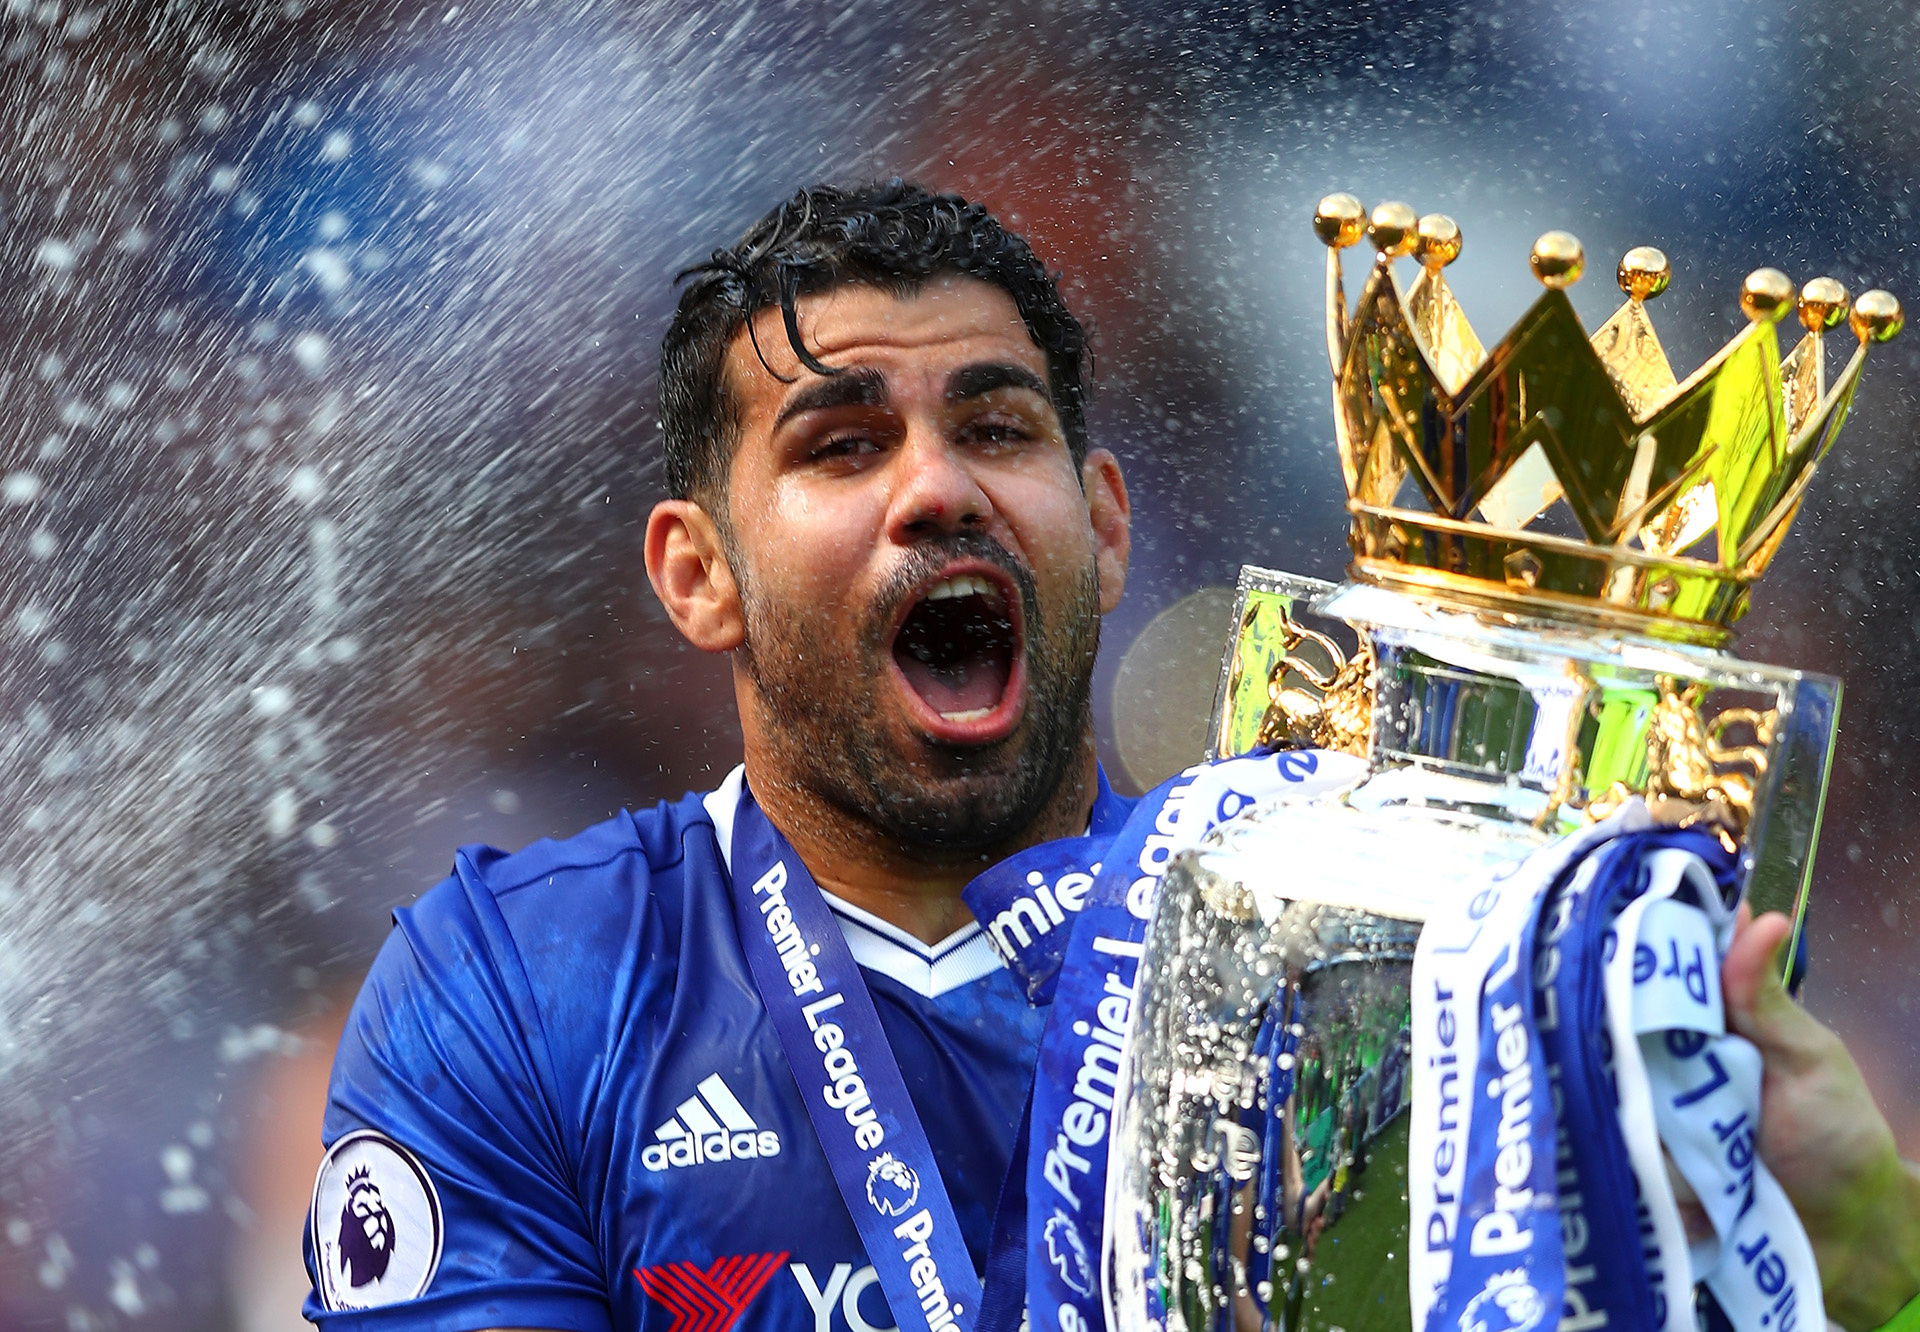 Diego Costa: Chelsea player, Celebrating with the Premier League Trophy after the Premier League match between Chelsea and Sunderland, Stamford Bridge, May 21, 2017, London, England. 1920x1340 HD Wallpaper.